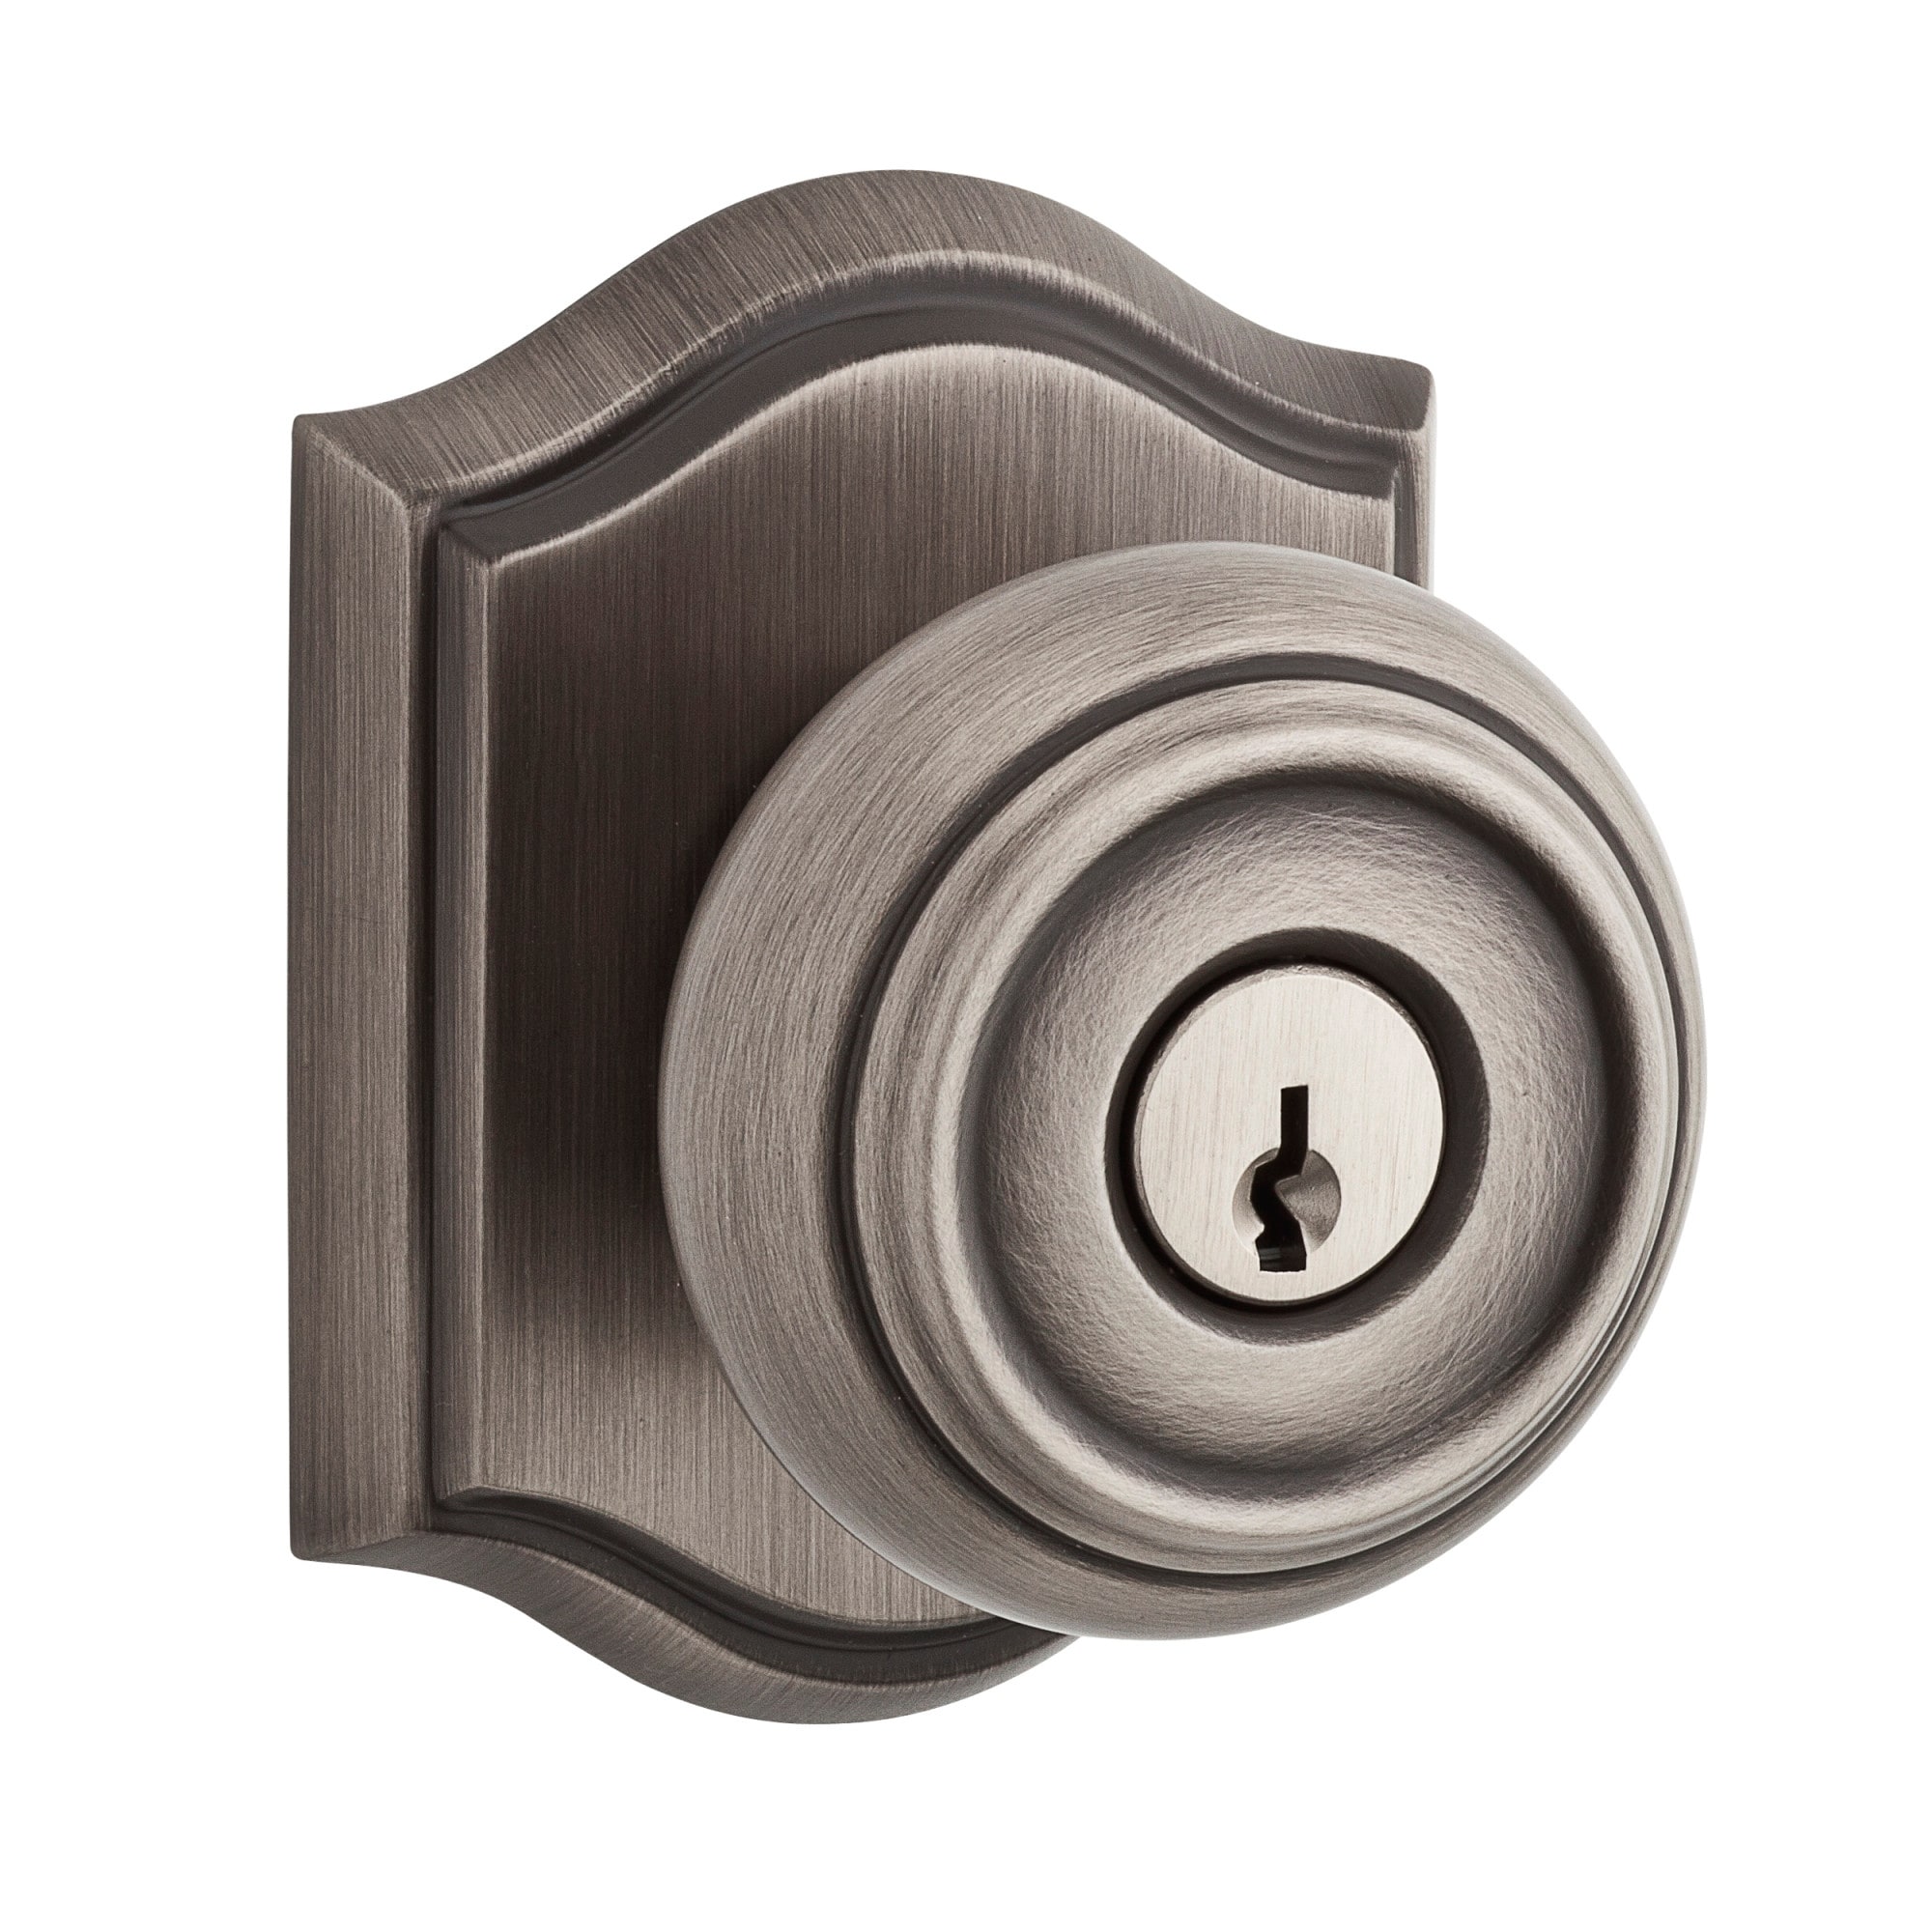 Baldwin Traditional Single Cylinder Keyed Entry Door Knob with Arch Bed  Bath  Beyond 16114081